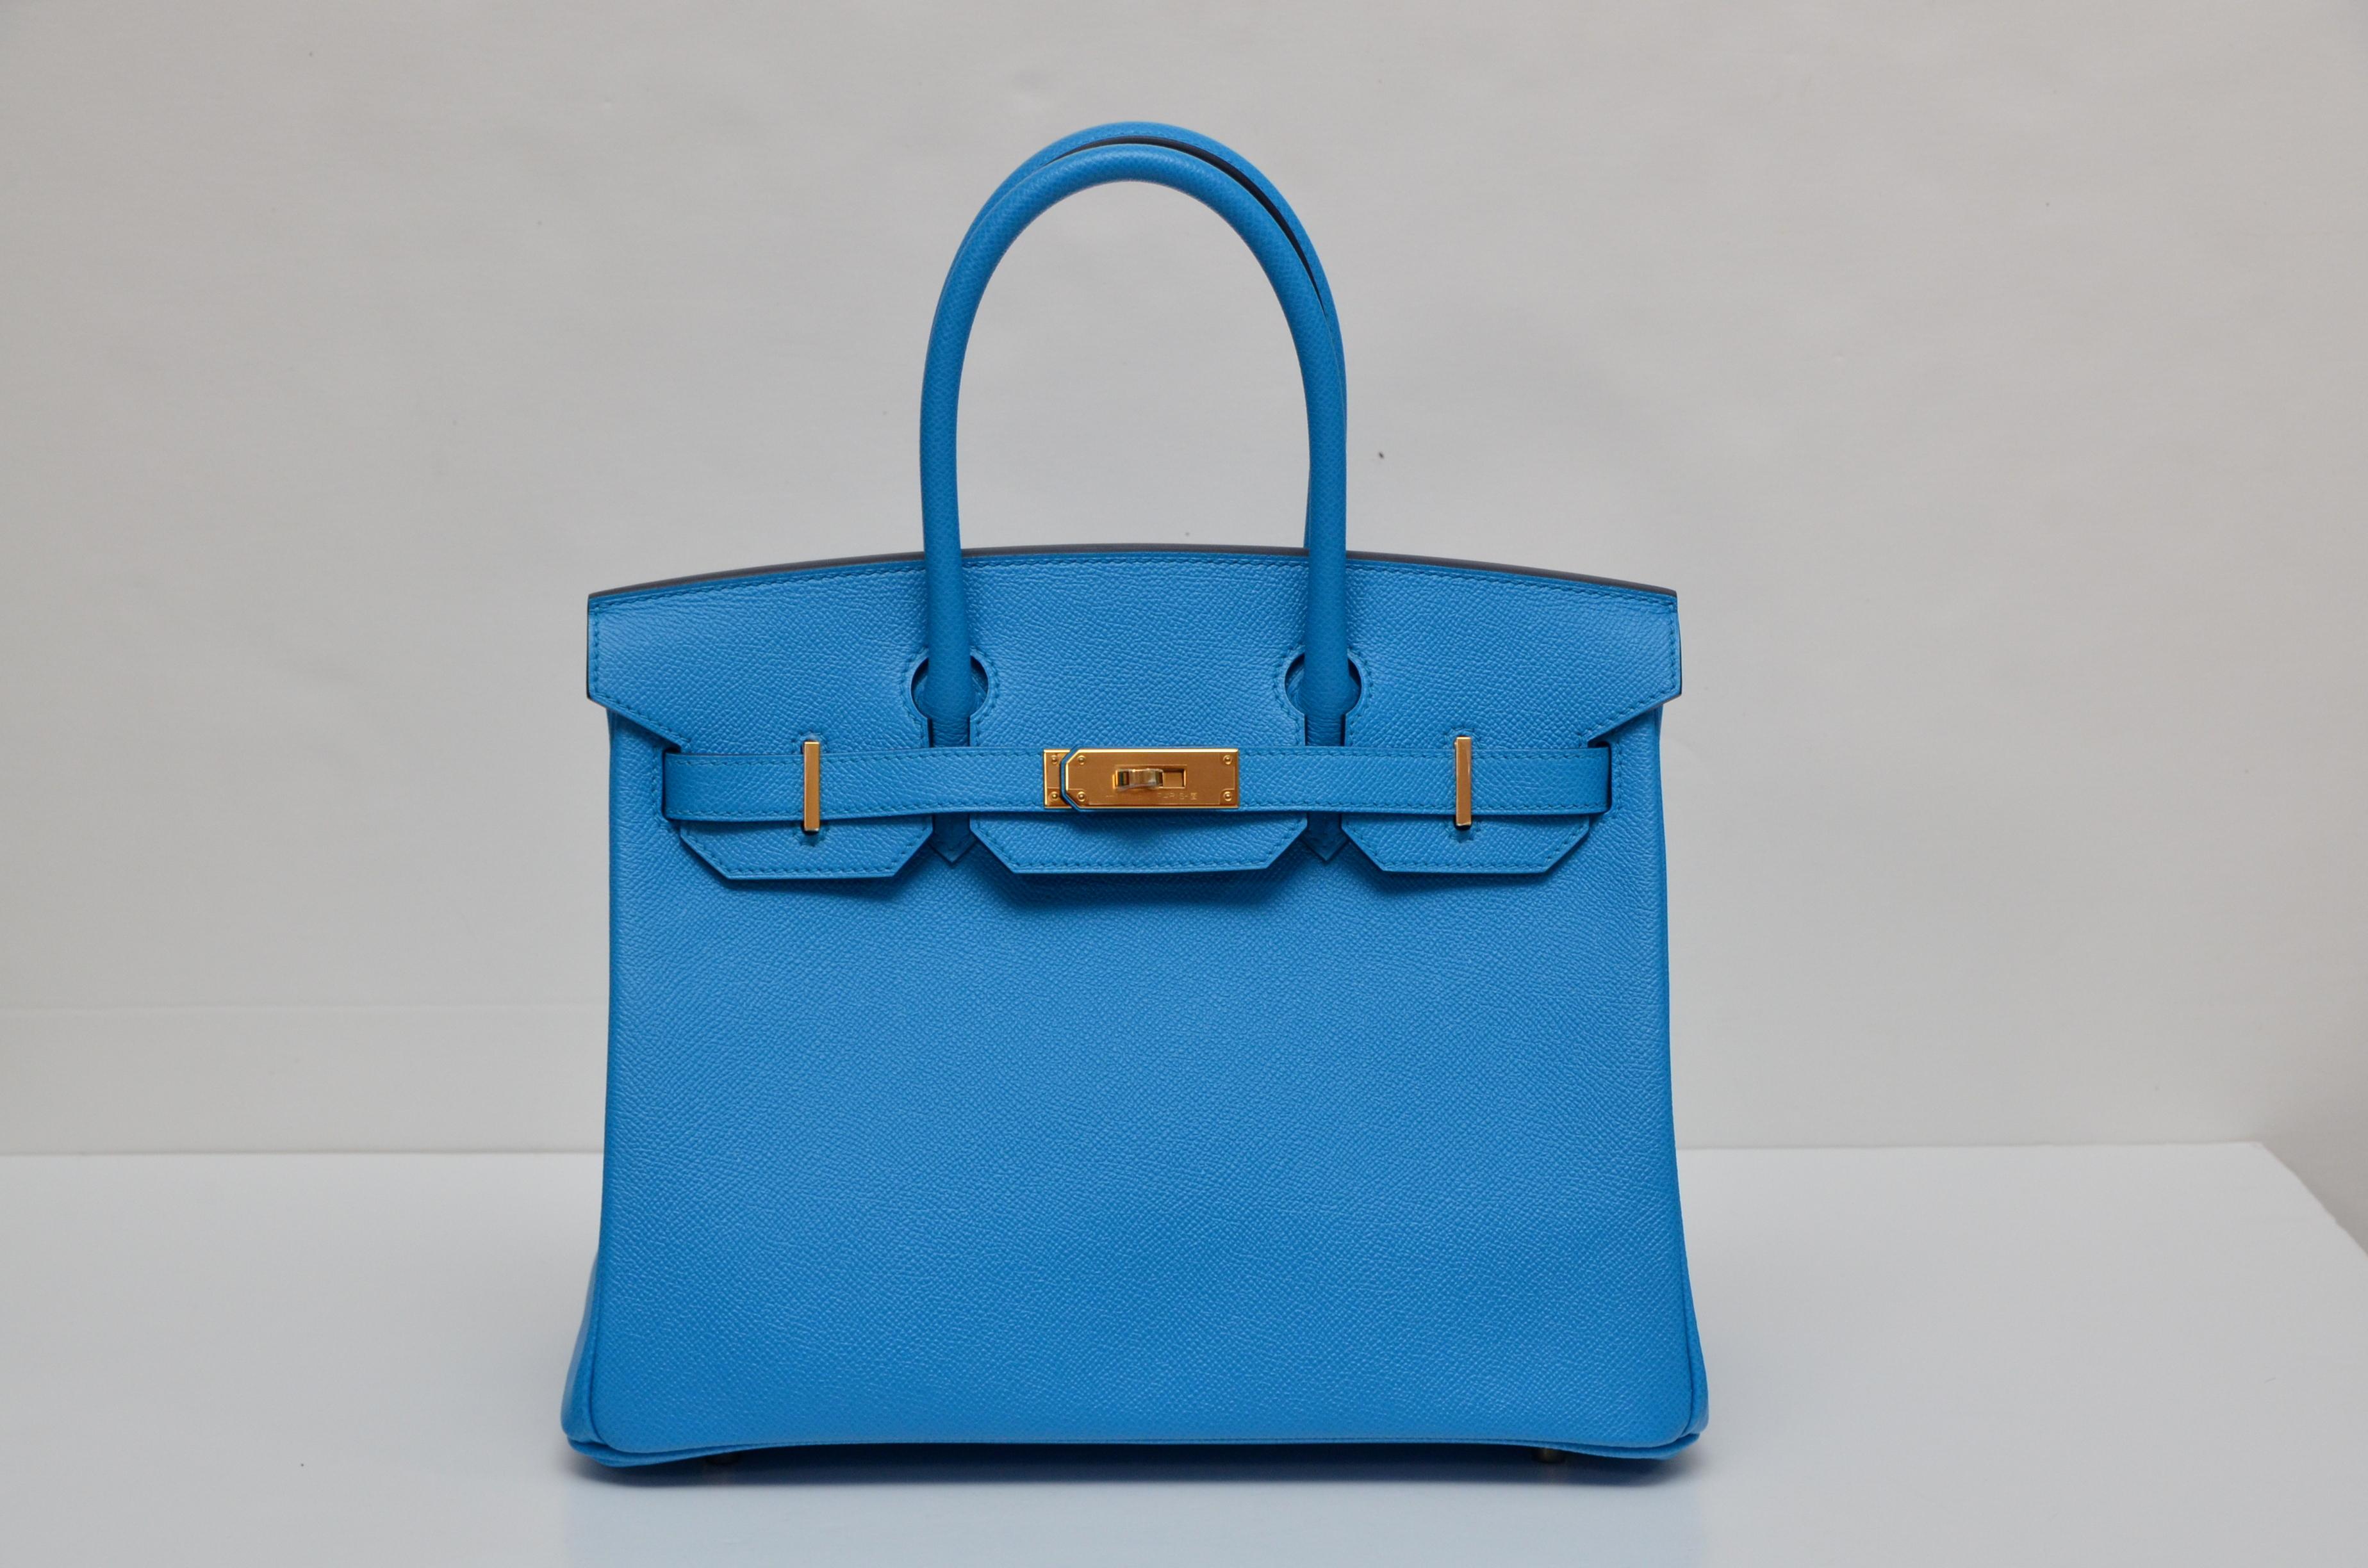 Guaranteed 100% authentic  Hermes Birkin.
Original receipt with all personal info covered available upon request.
Hermes Birkin 30 cm 
Color :Bleu Frida
Store fresh ,brand new never used with  lock and keys in the clochette, signature Hermes box,